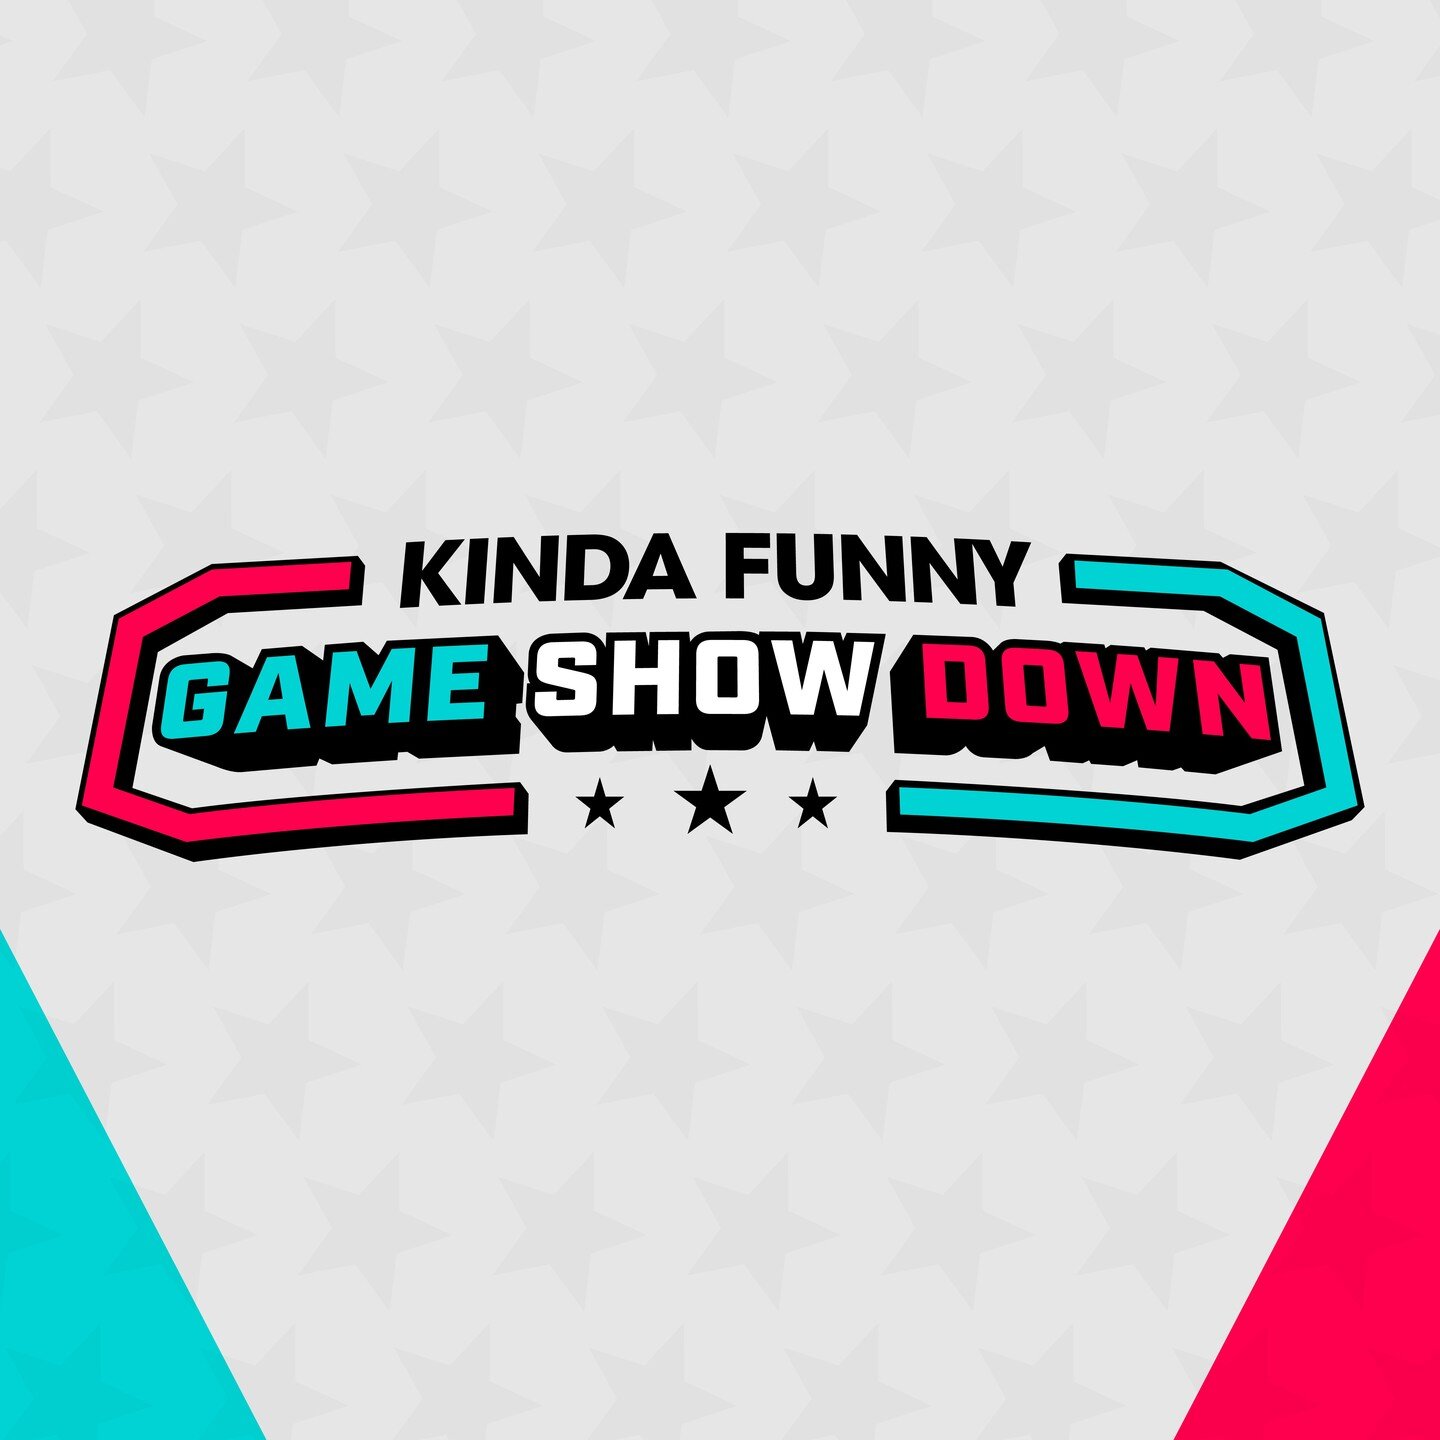 Logo design for @kindafunnyvids new game show series called Kinda Funny Game Showdown hosted by @blessingjr.

This is the main show logo. The direction was to make Game Show Down segmented and play into the VS element of the show. The stars are in re